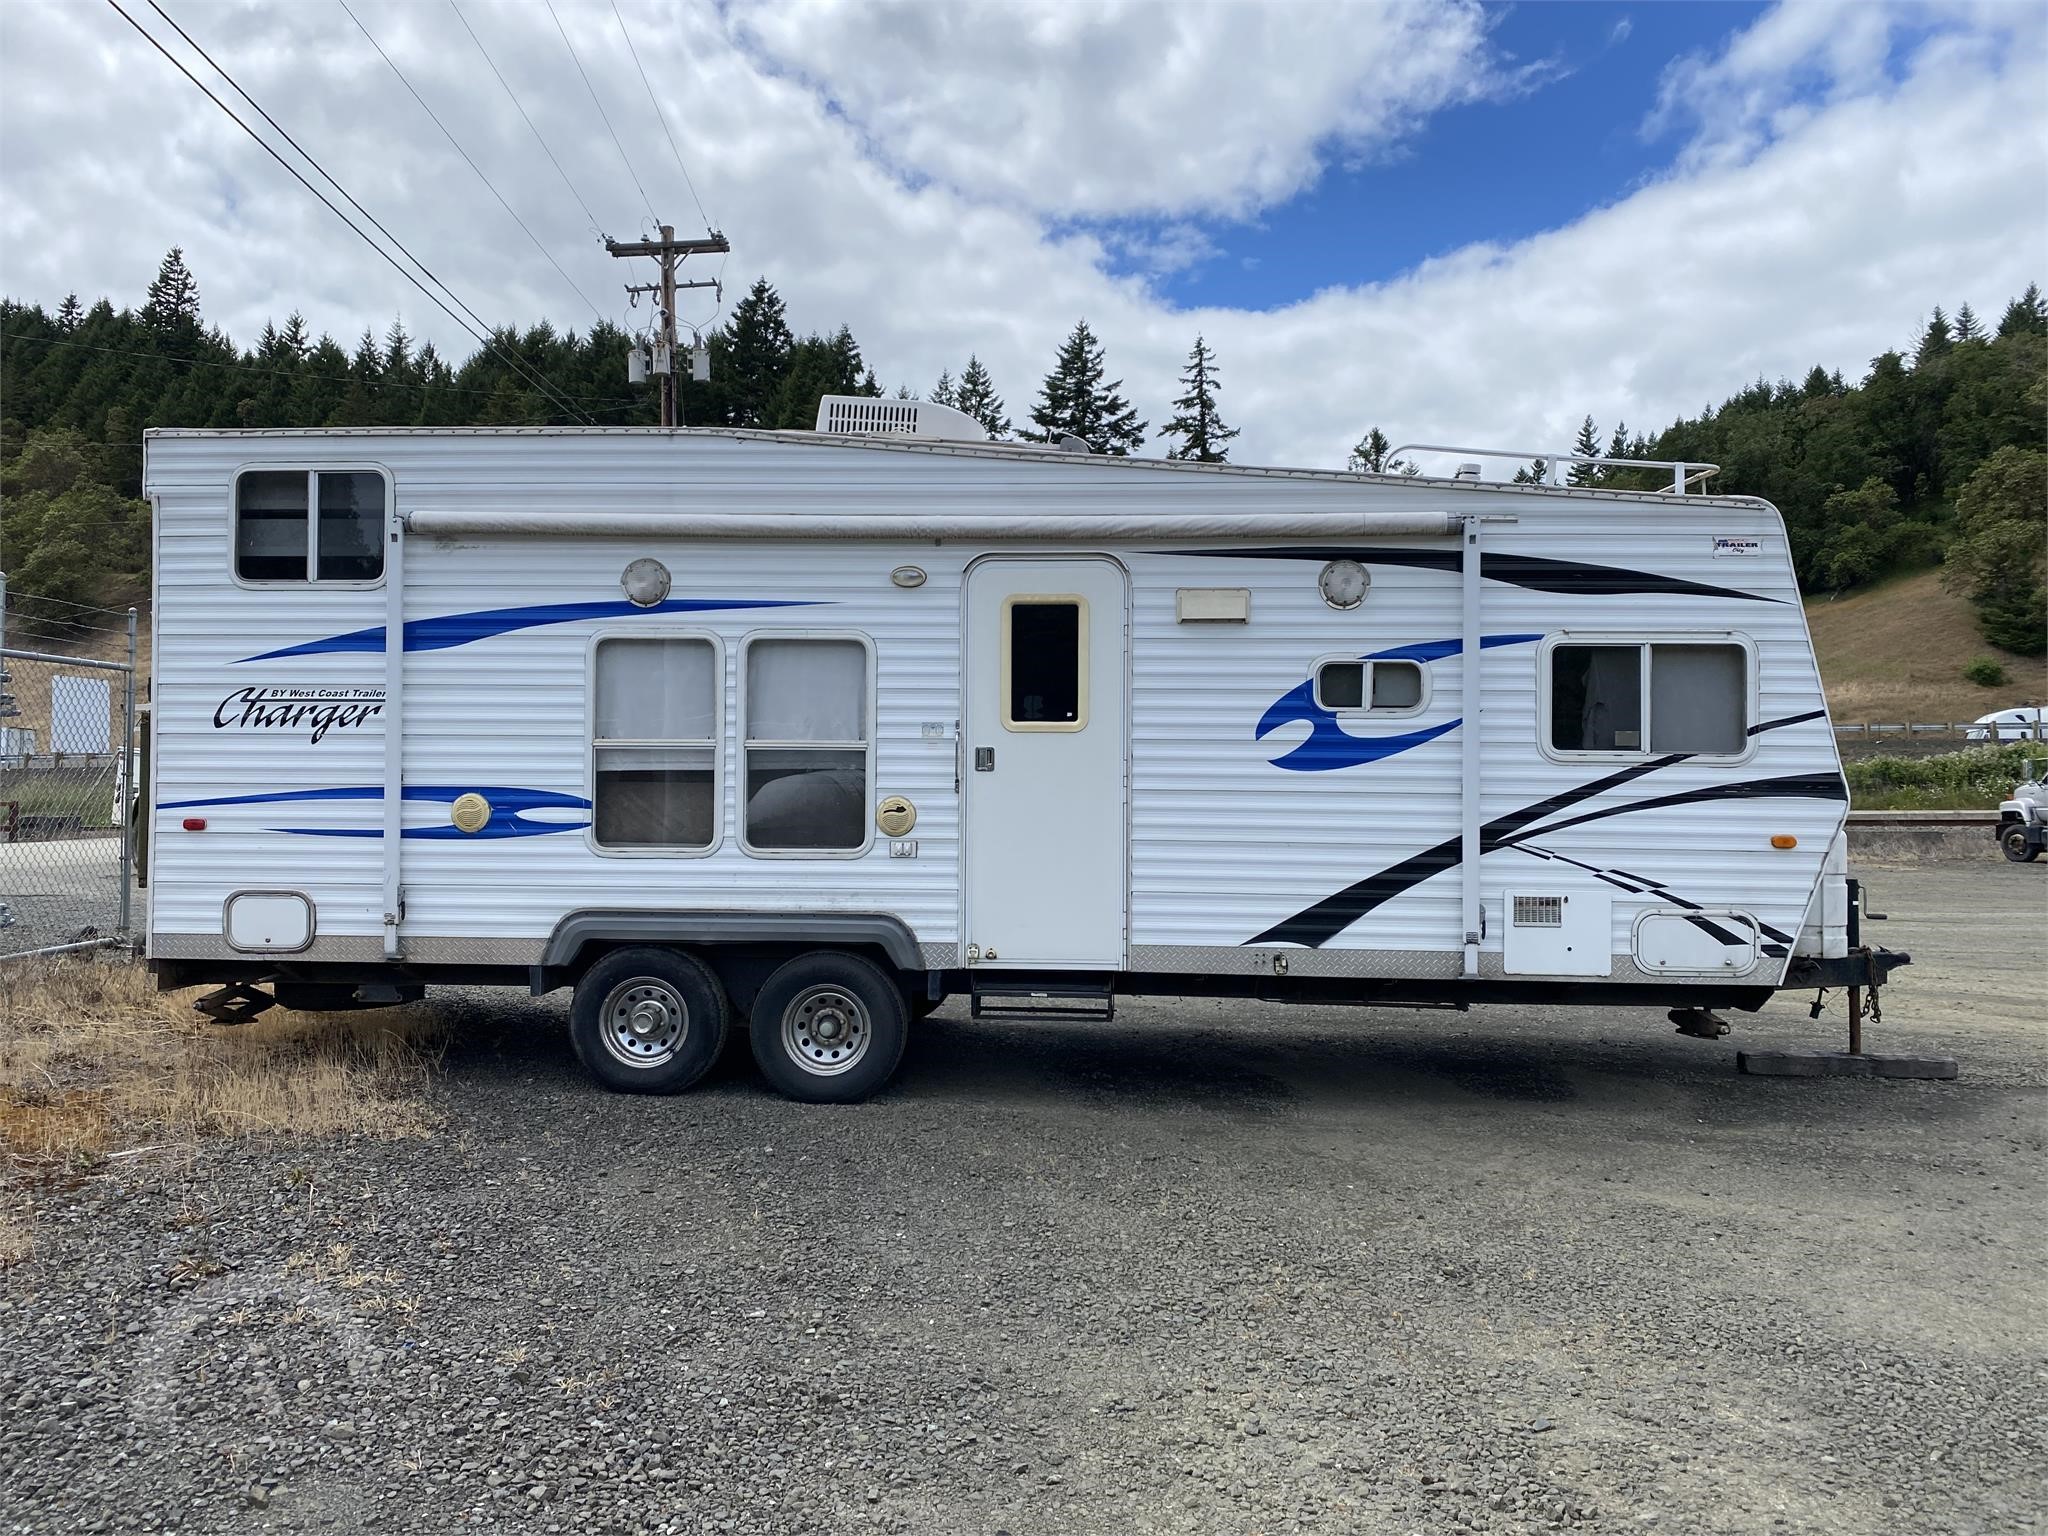 2007 WEST COAST TRAILERS CHARGER 25TH | Auction Results | AuctionTime.com